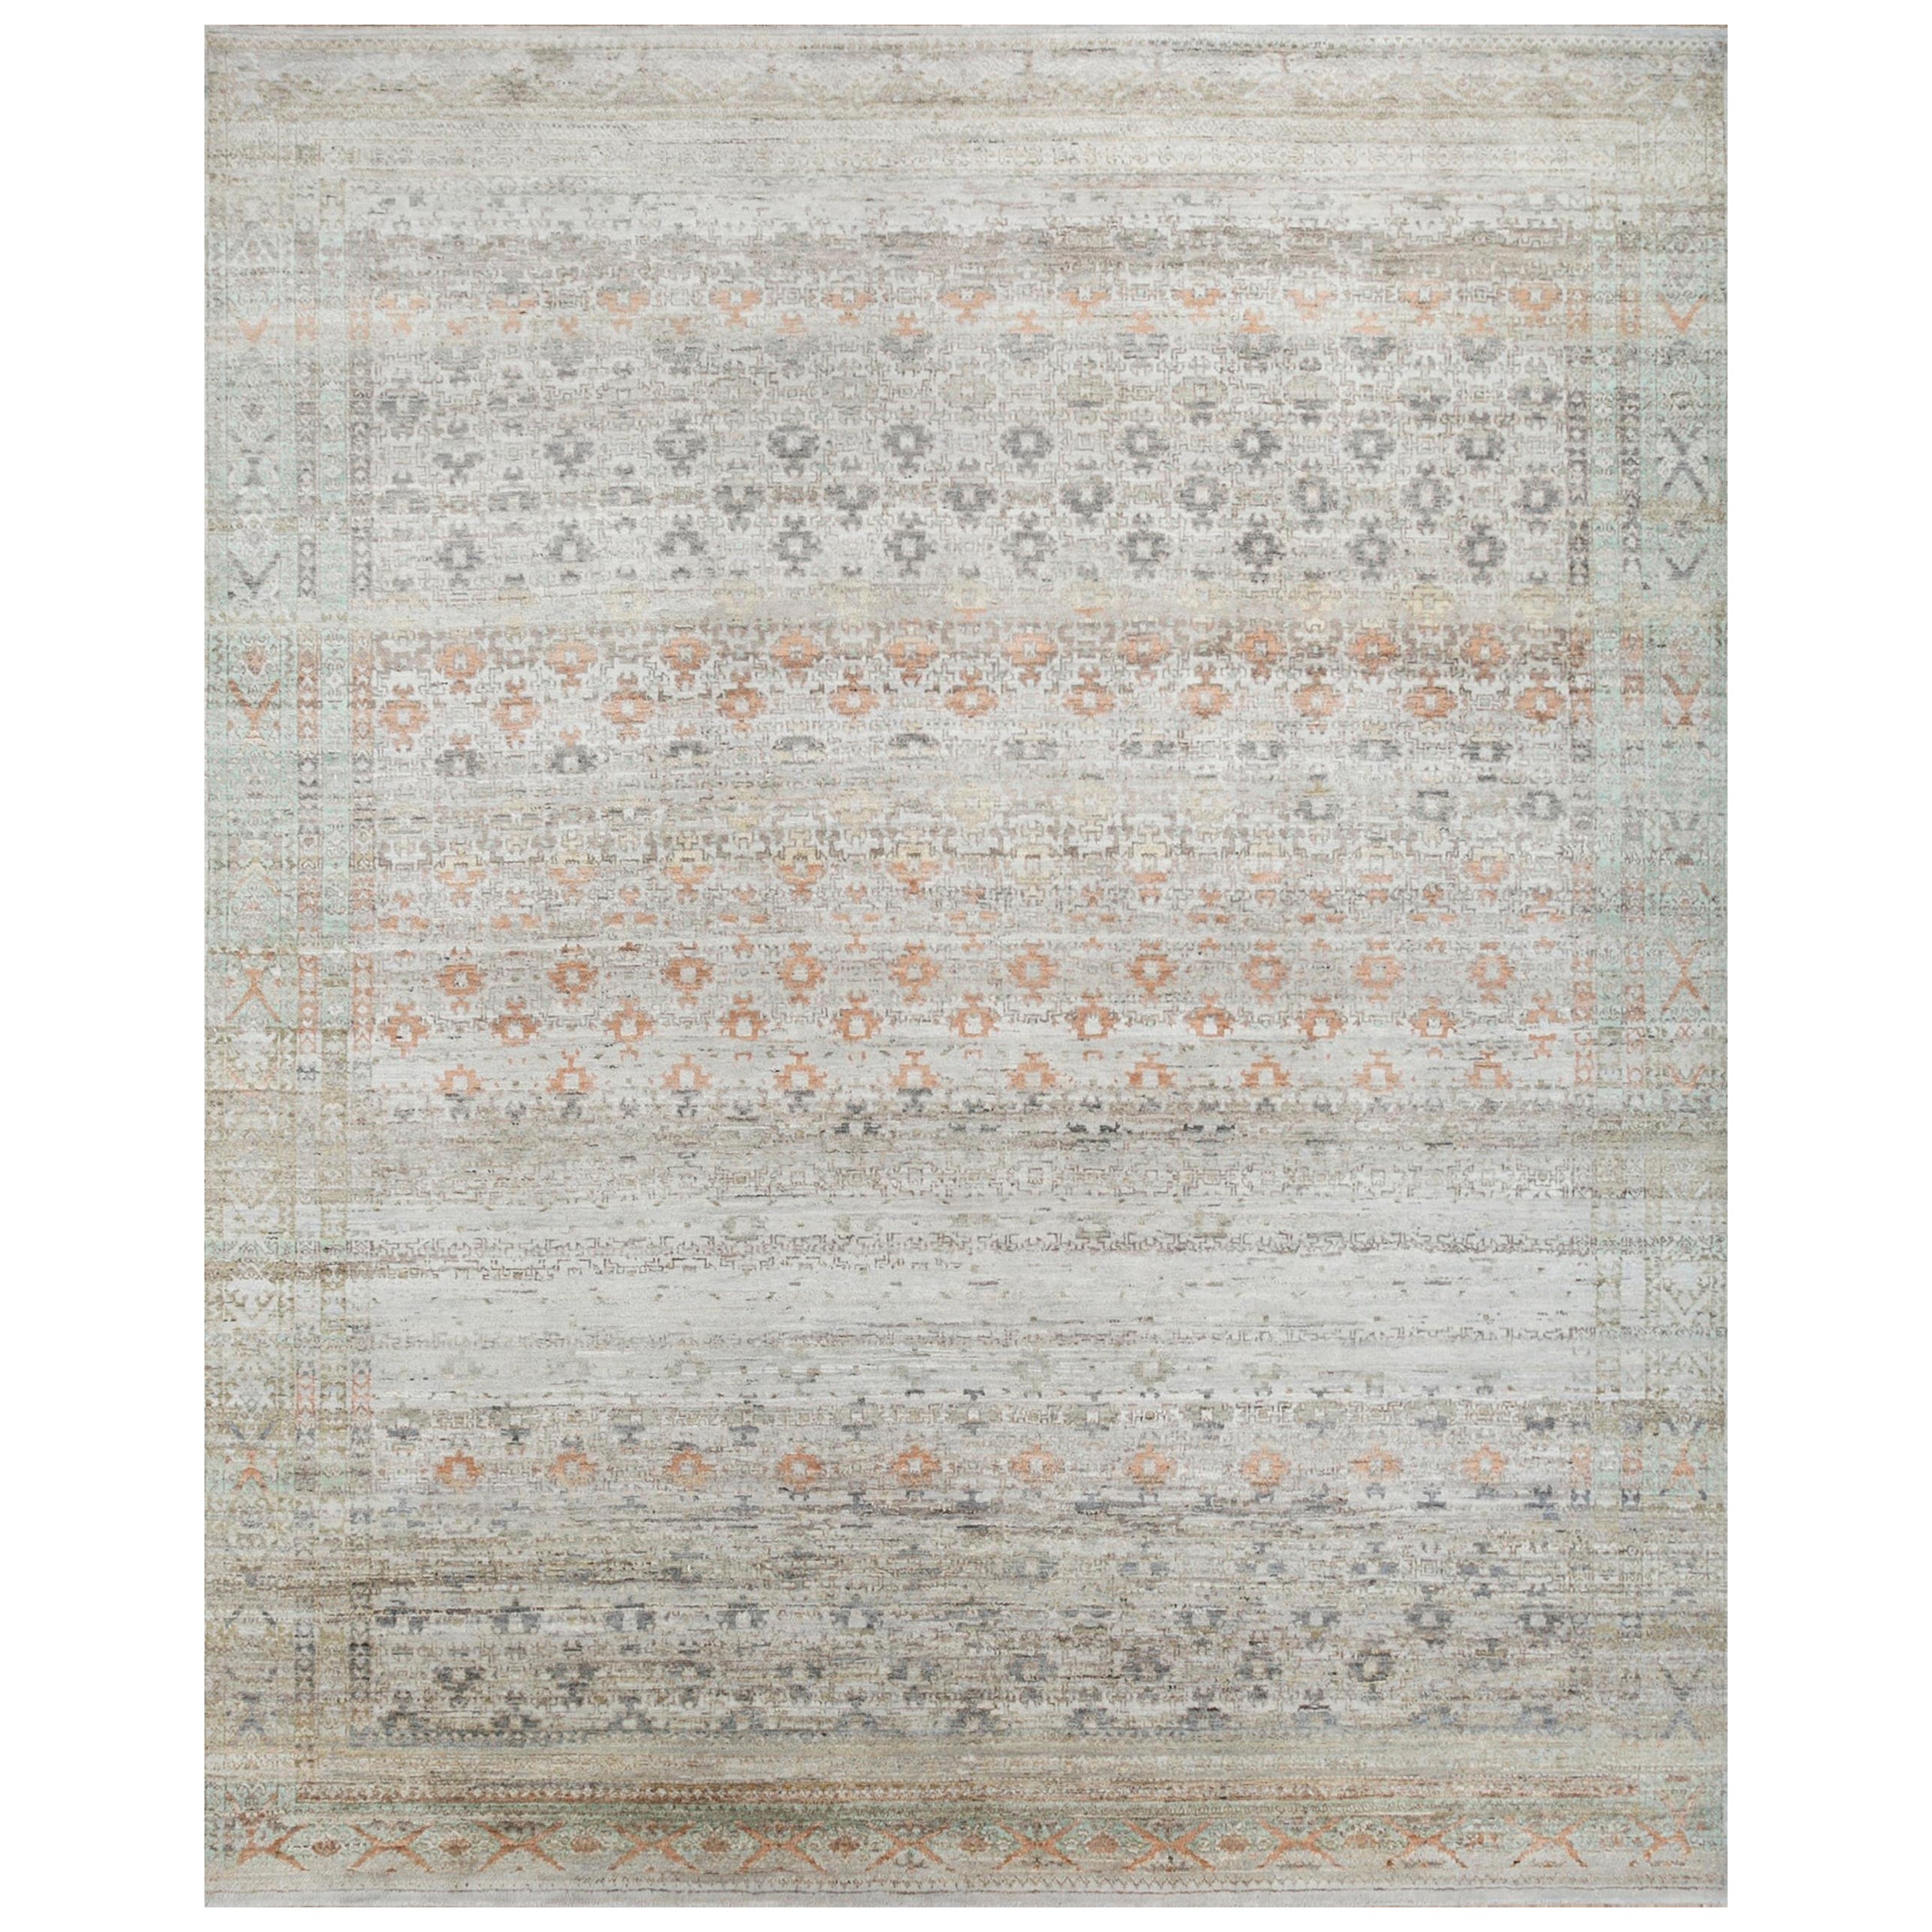 Artisan Alchemy Cloud White & Soft Beige 240X300 cm Handknotted Rug For Sale